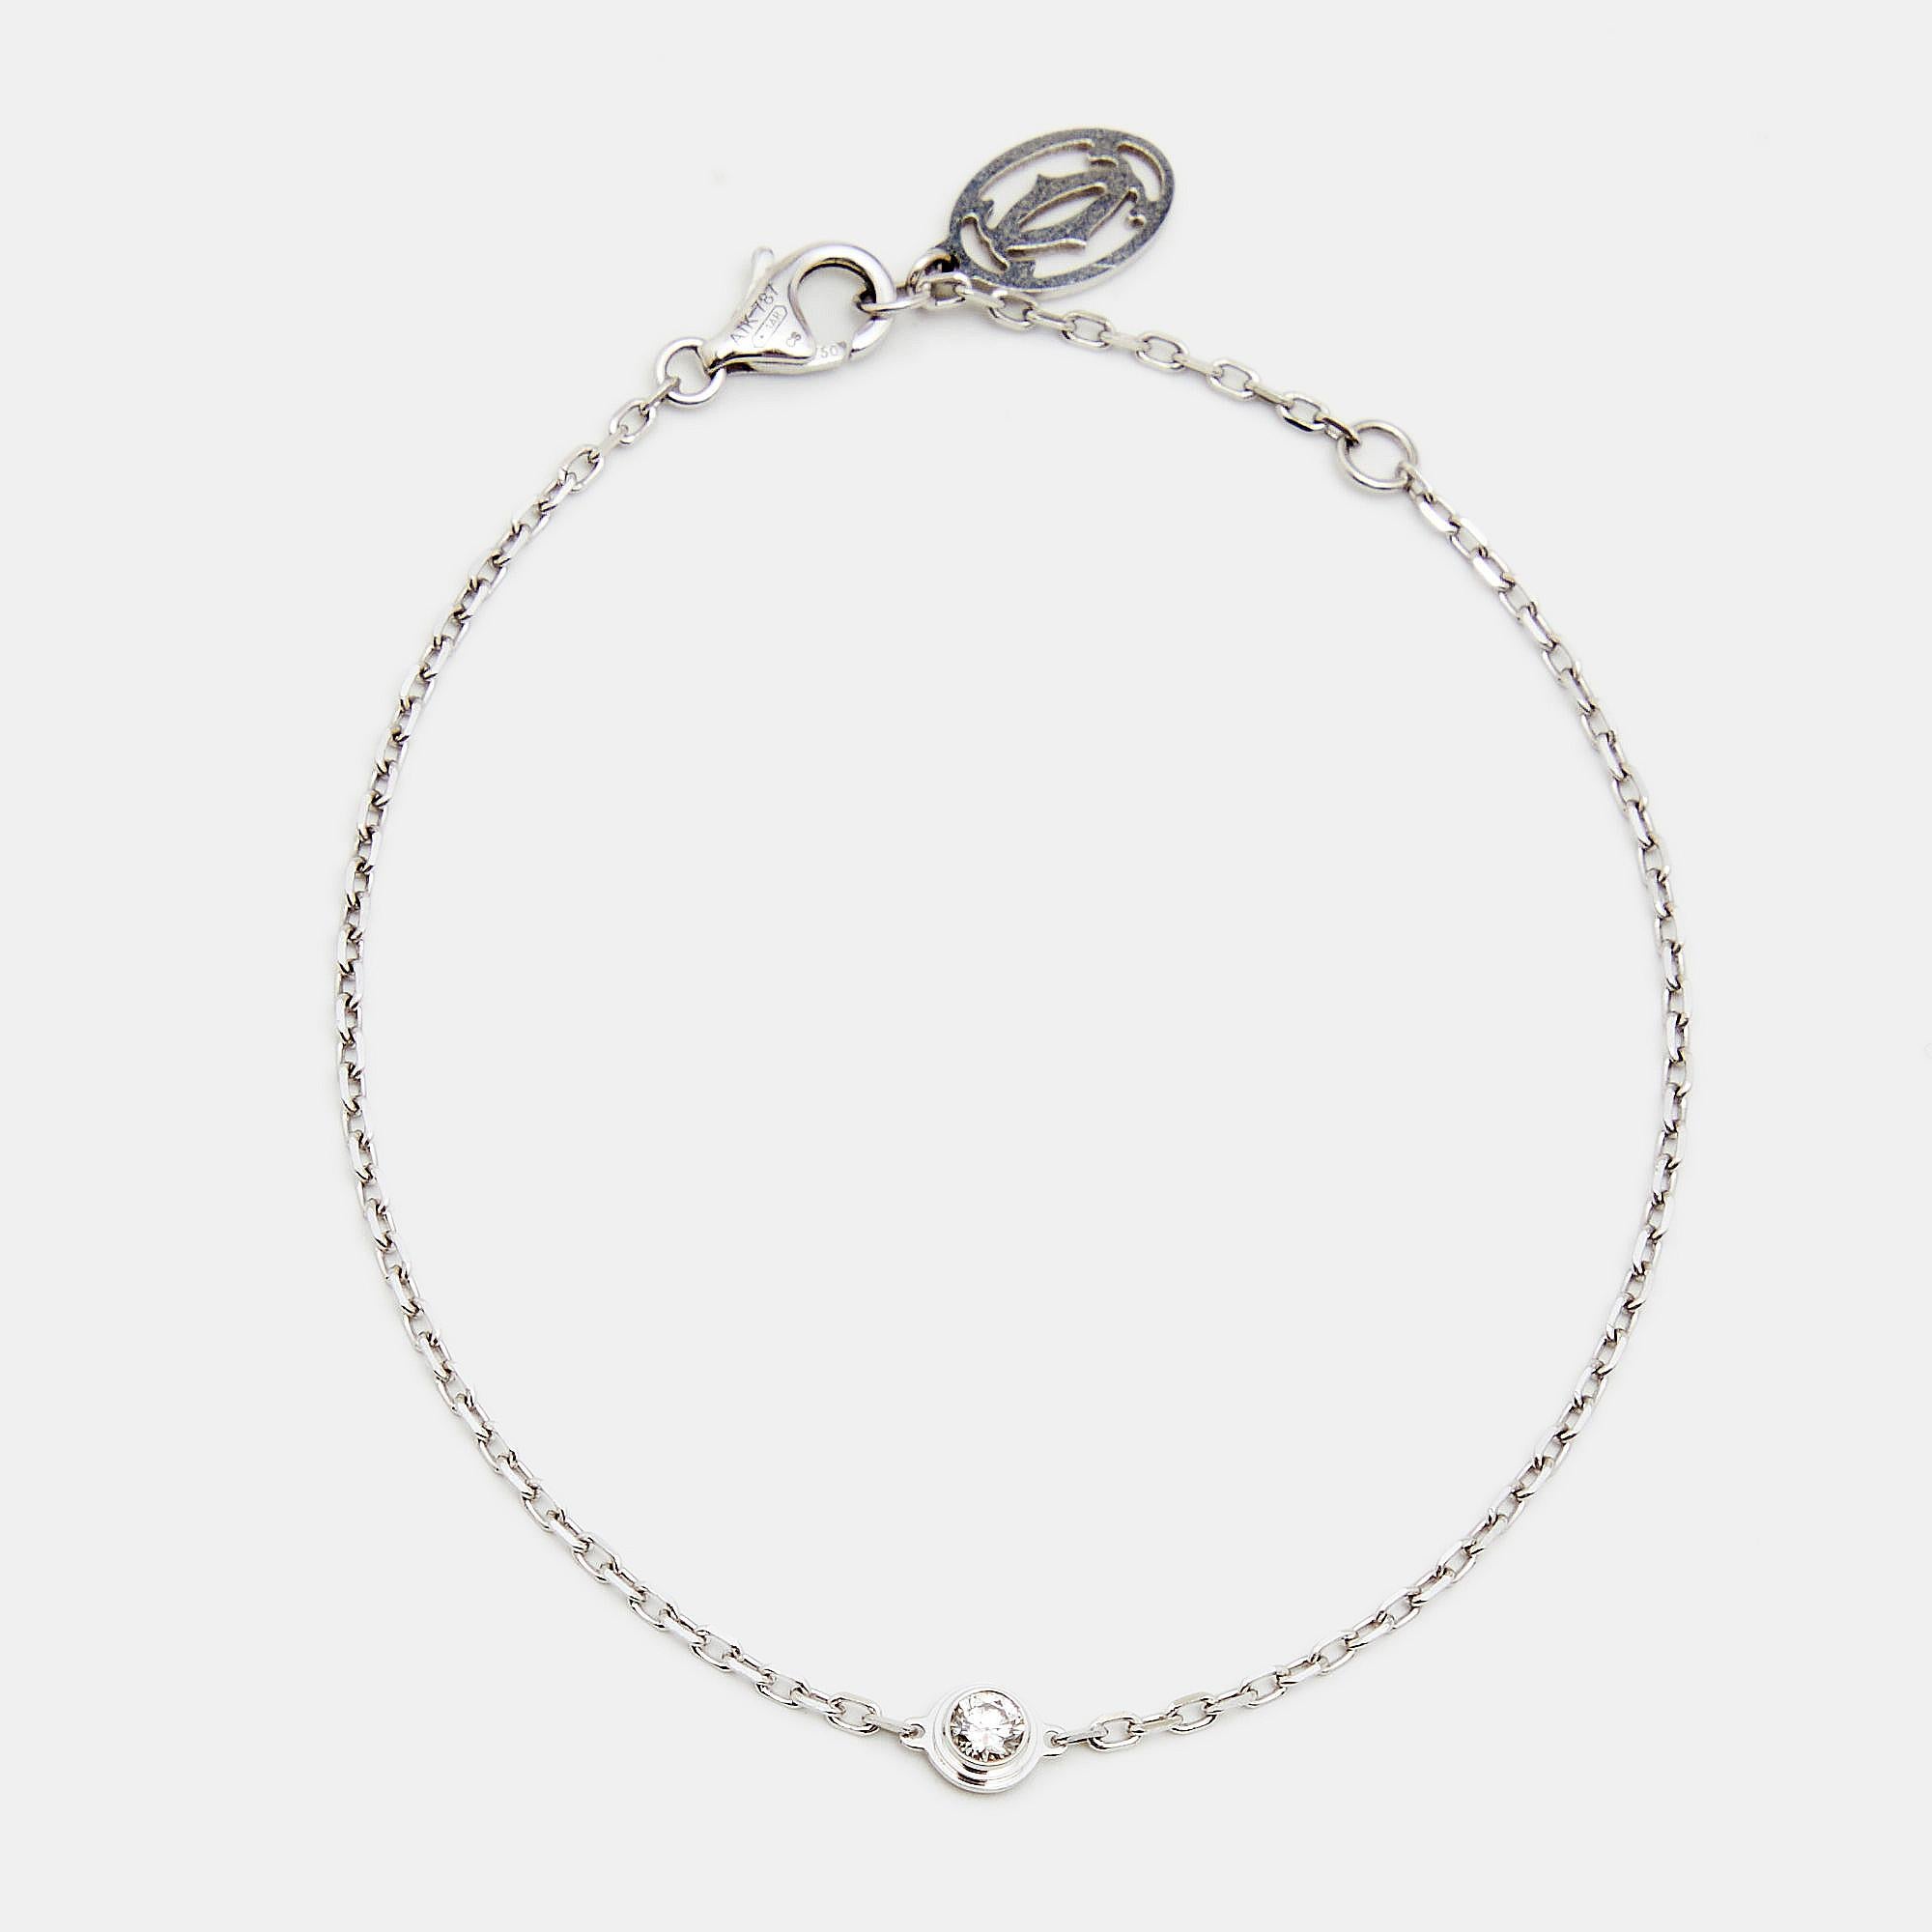 The Diamants Legers De Cartier collection of Cartier is all about bringing feminine elegance into light by deploying exceptional diamonds into minimalist designs. This bracelet rendered in 18k white gold exhibits just that. It consists of a simple